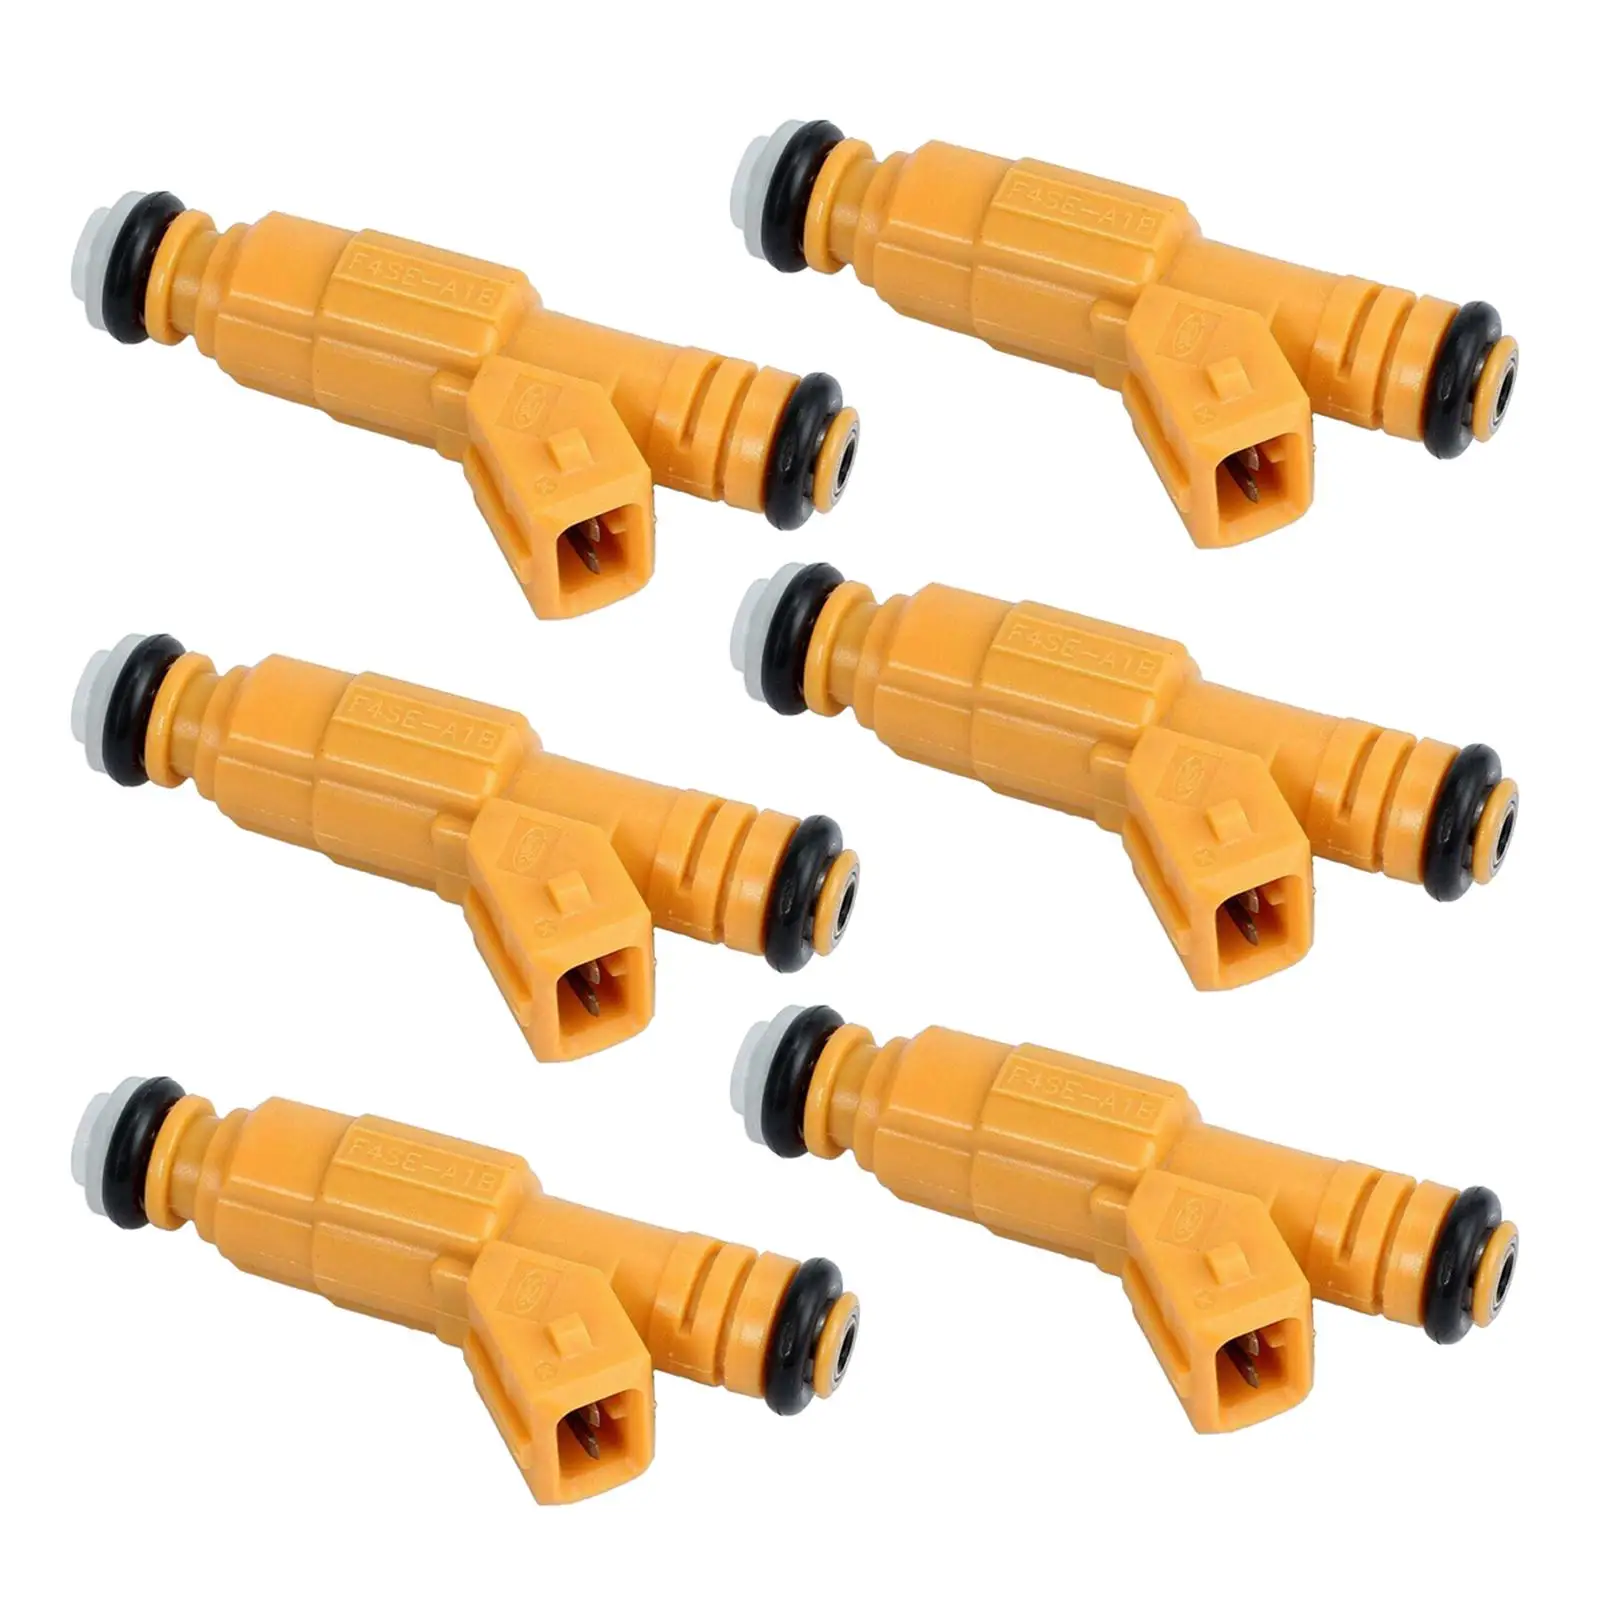 6pcs Auto 0280155710 Fuel Injectors Replaces Parts Fuel Injection Spare  Parts For Jeep Wrangler Grand Cherokee  - Fuel Injector - AliExpress